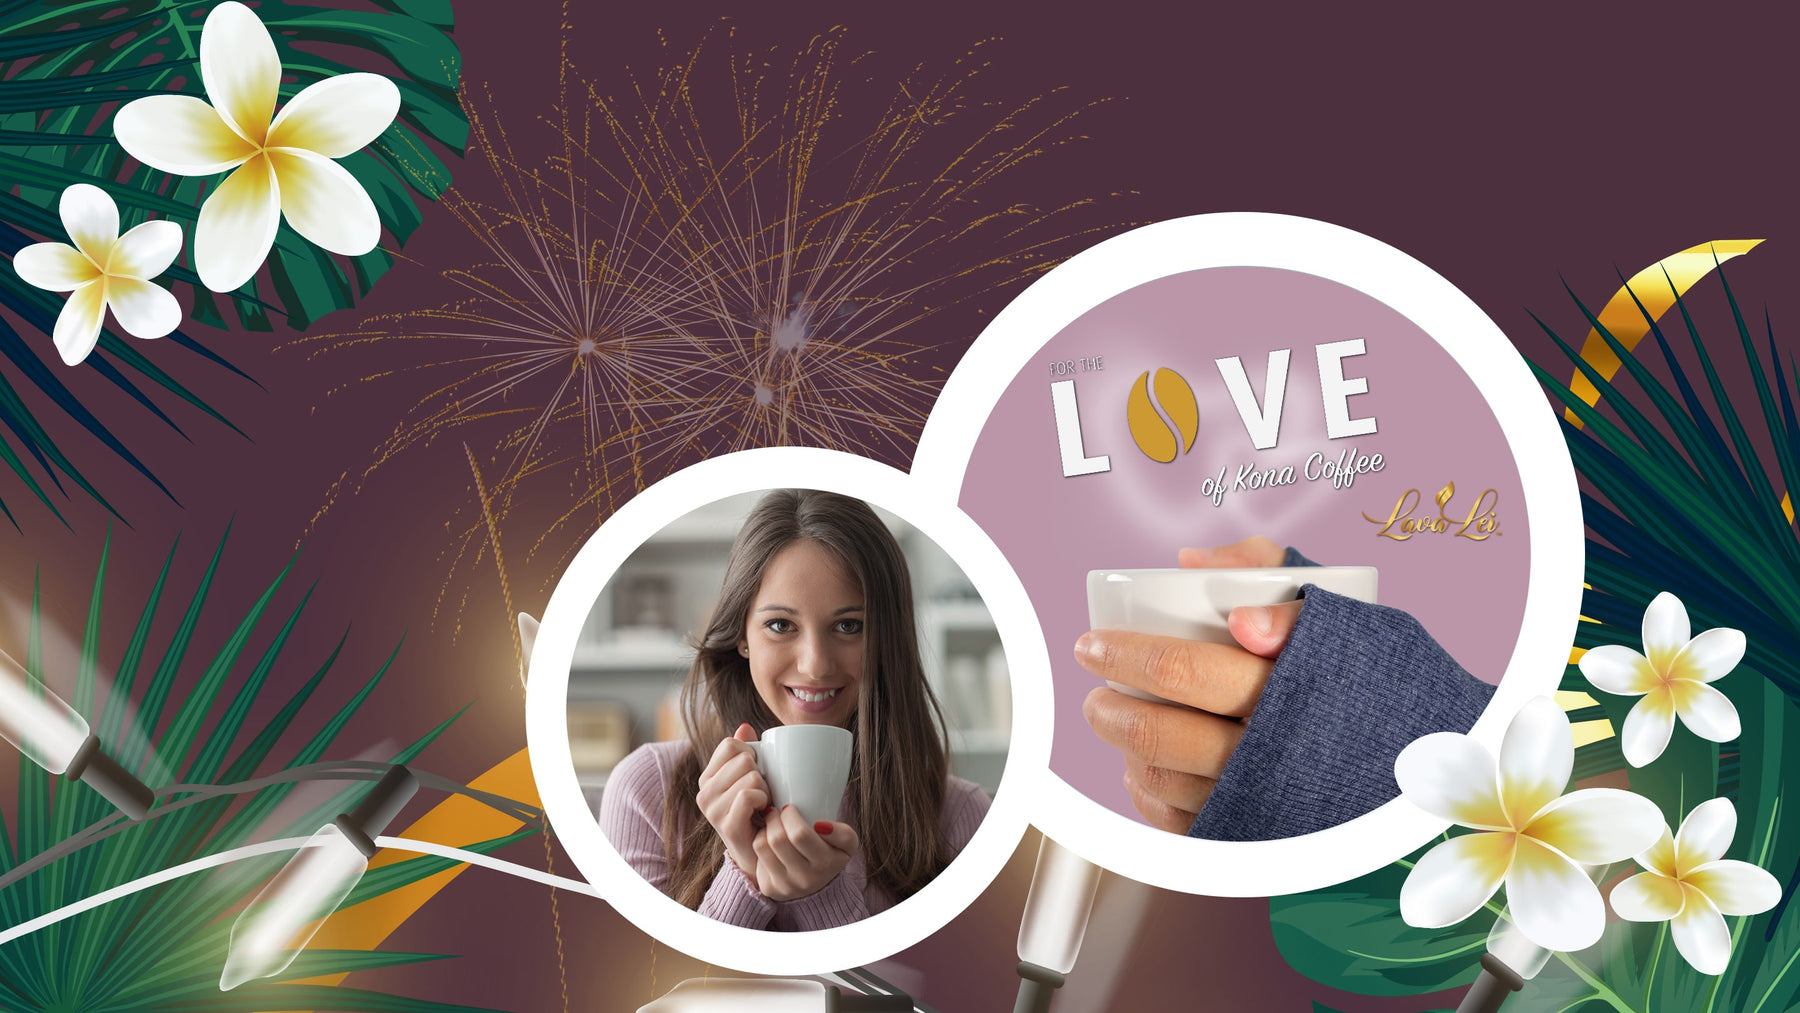 Collage featuring a smiling lady holding a coffee mug, with text: 'Love Kalua Coffee'. Background includes holiday lights and plumeria flowers